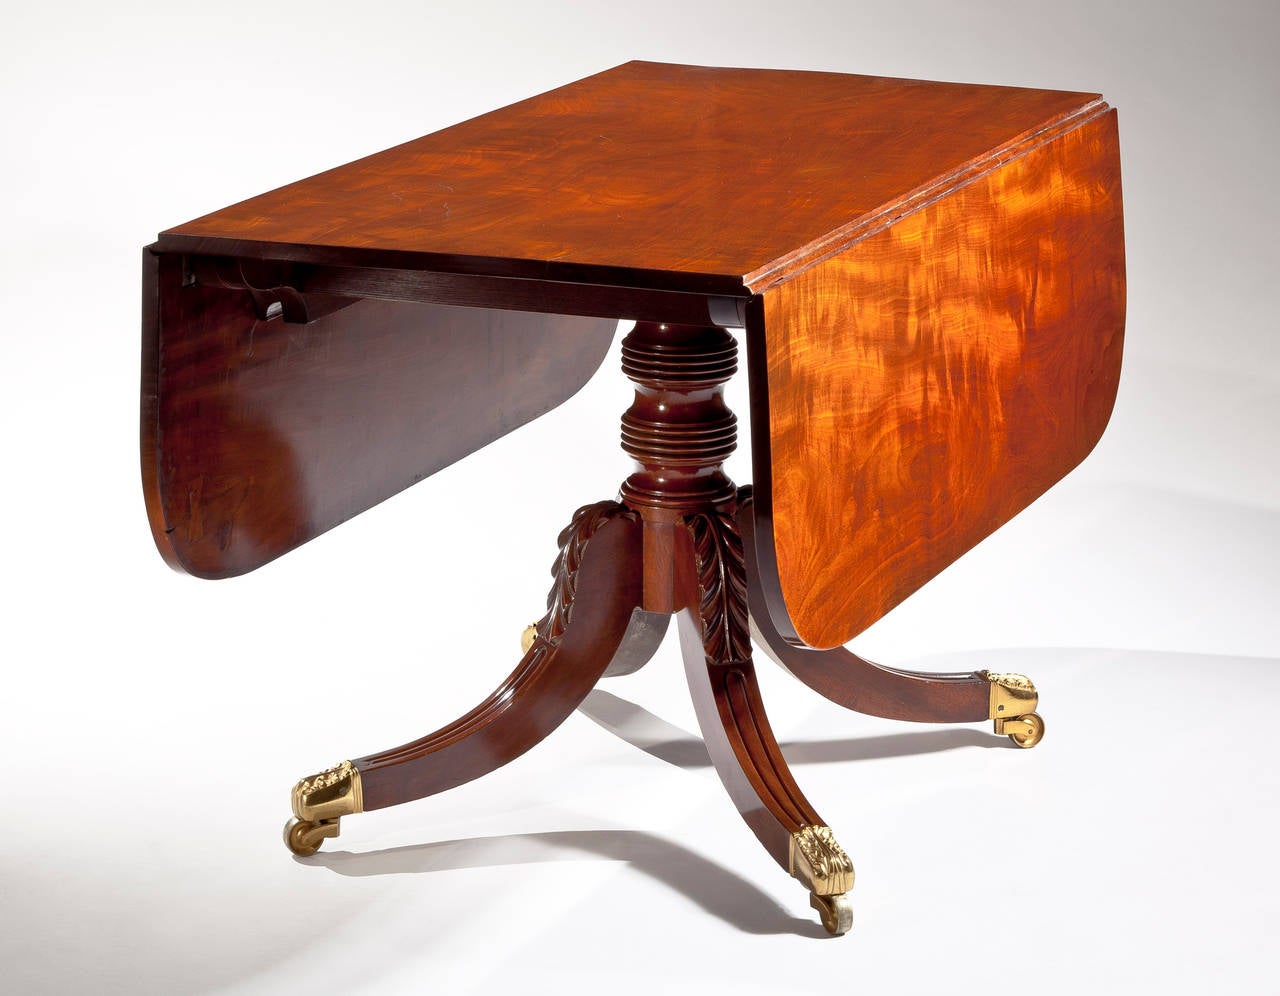 Attributed to Duncan Phyfe (1770-1854),
New York, circa 1820.

The figured solid mahogany top with D-shaped drop leaves on a single ring-turned pedestal raised on saber legs with distinctive acanthus carving at the knees, terminating in elaborate